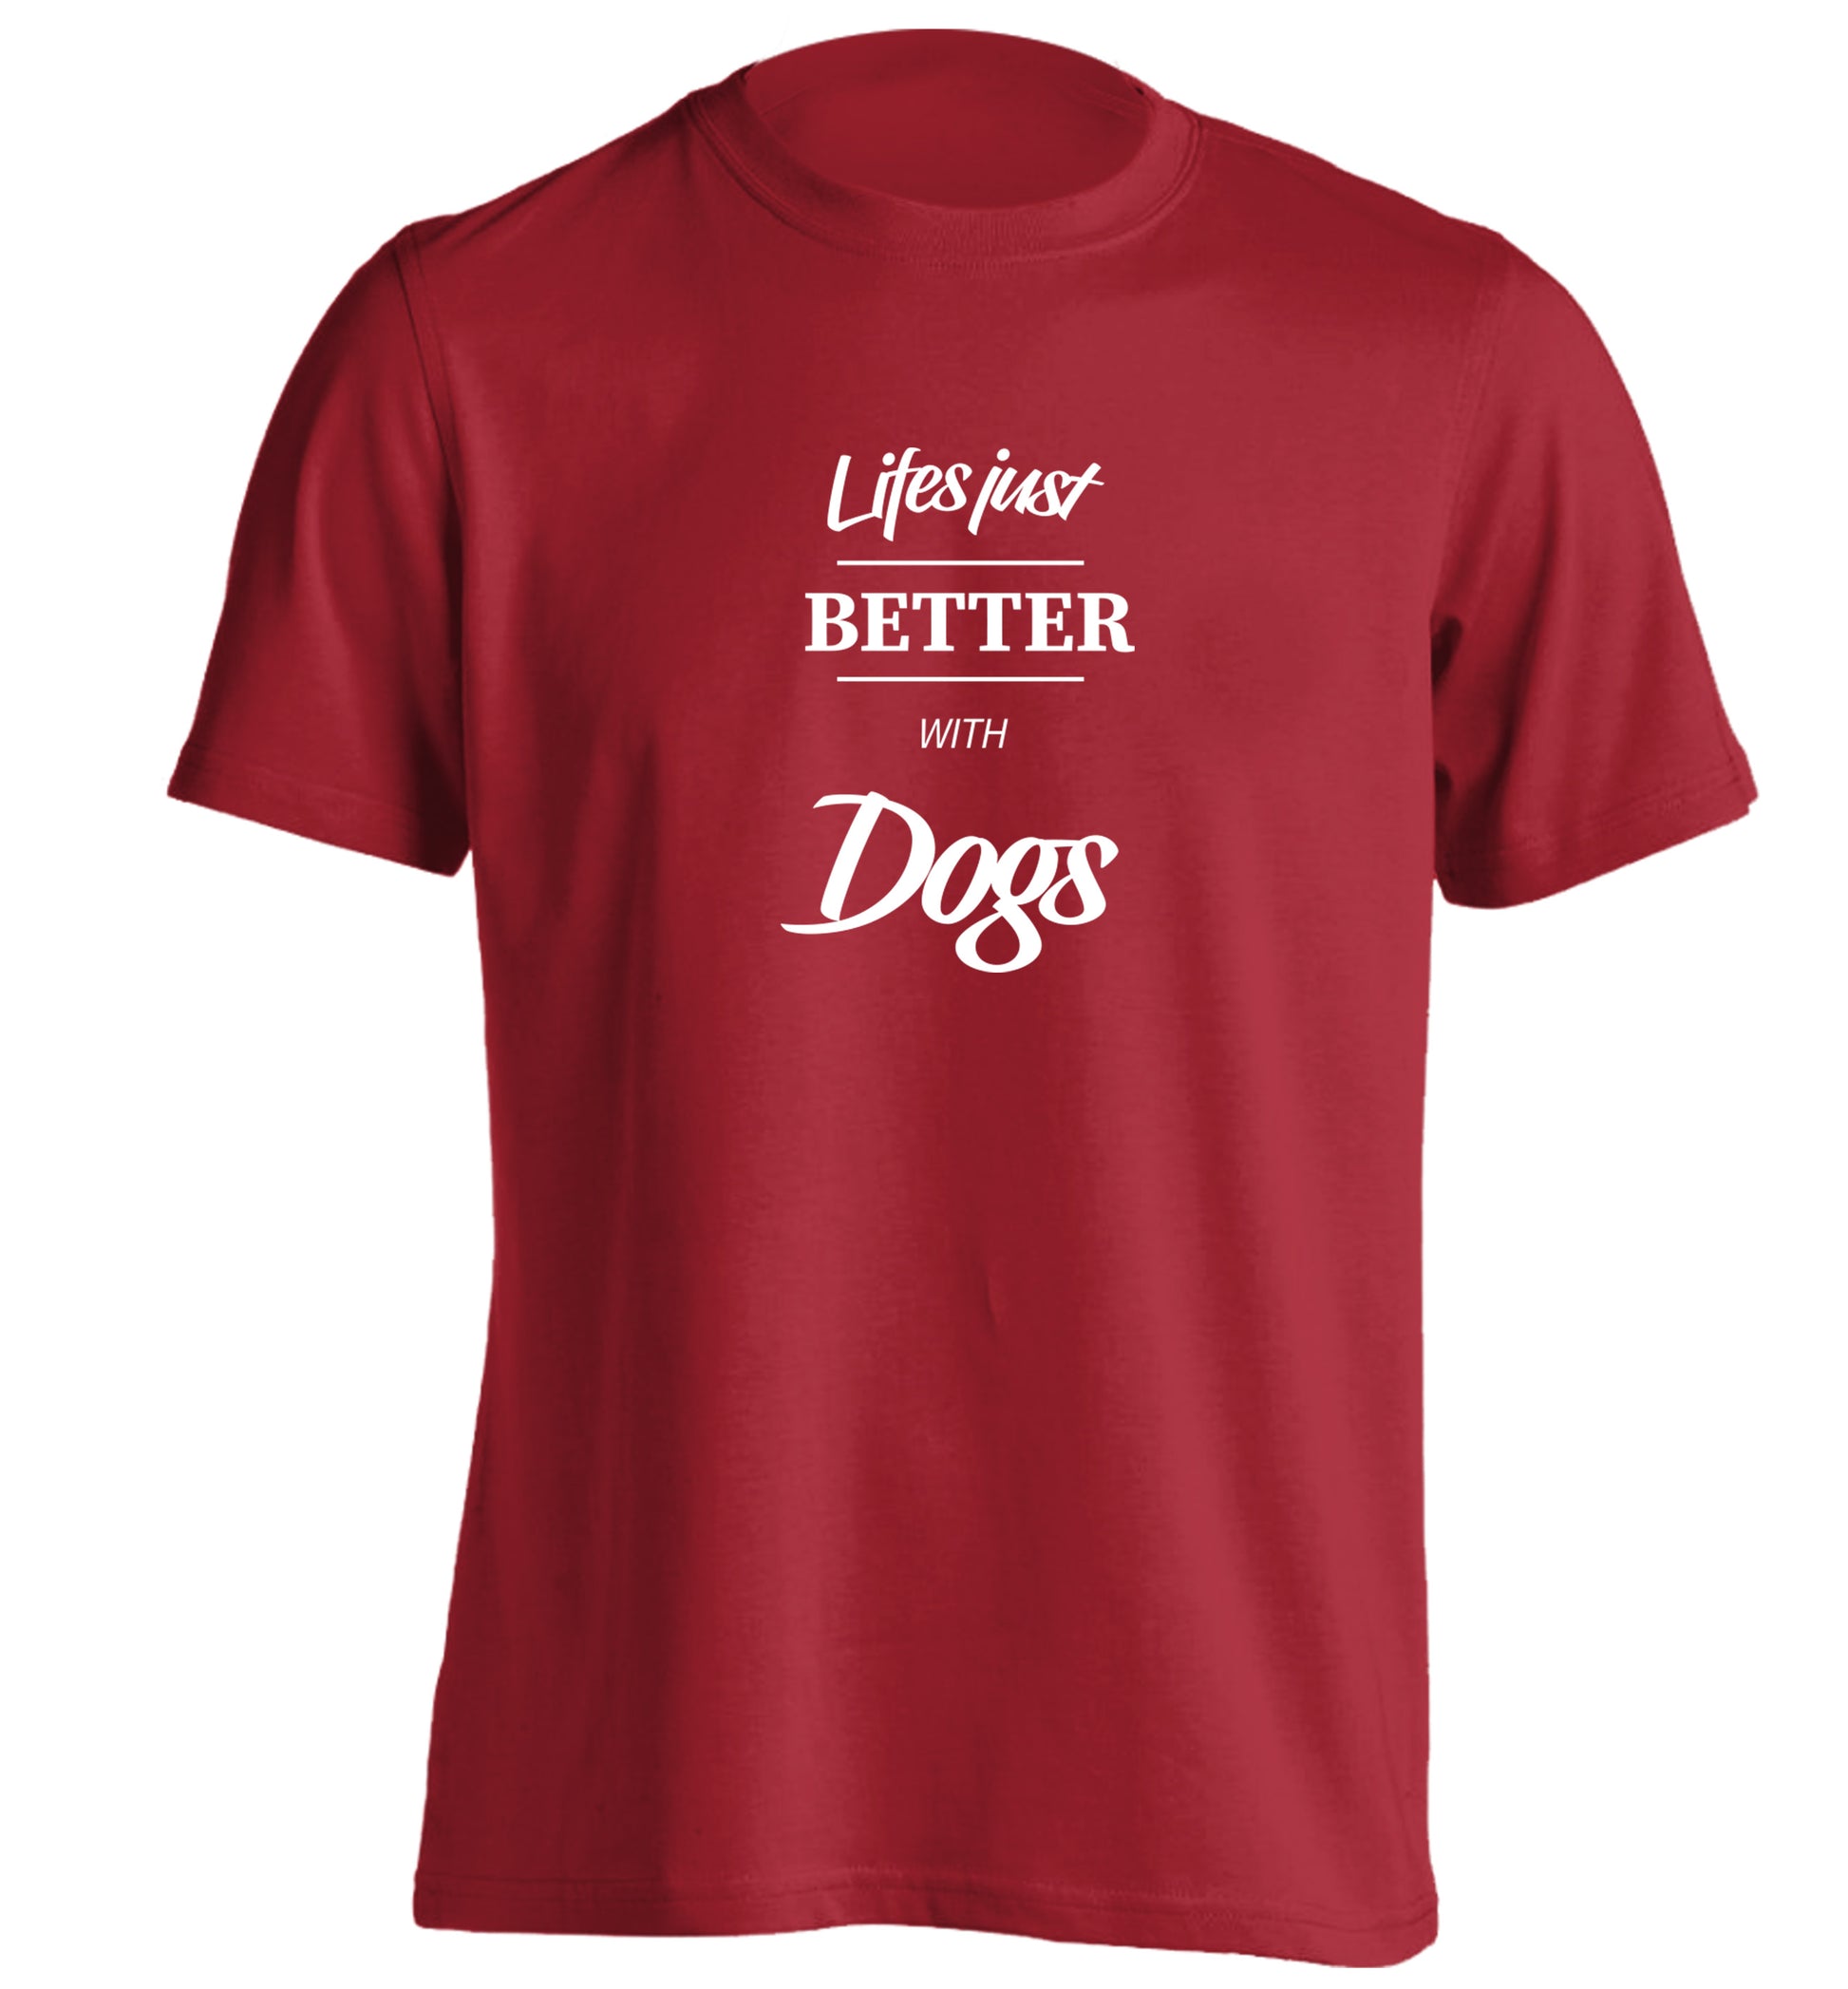 life is better with dogs adults unisex red Tshirt 2XL